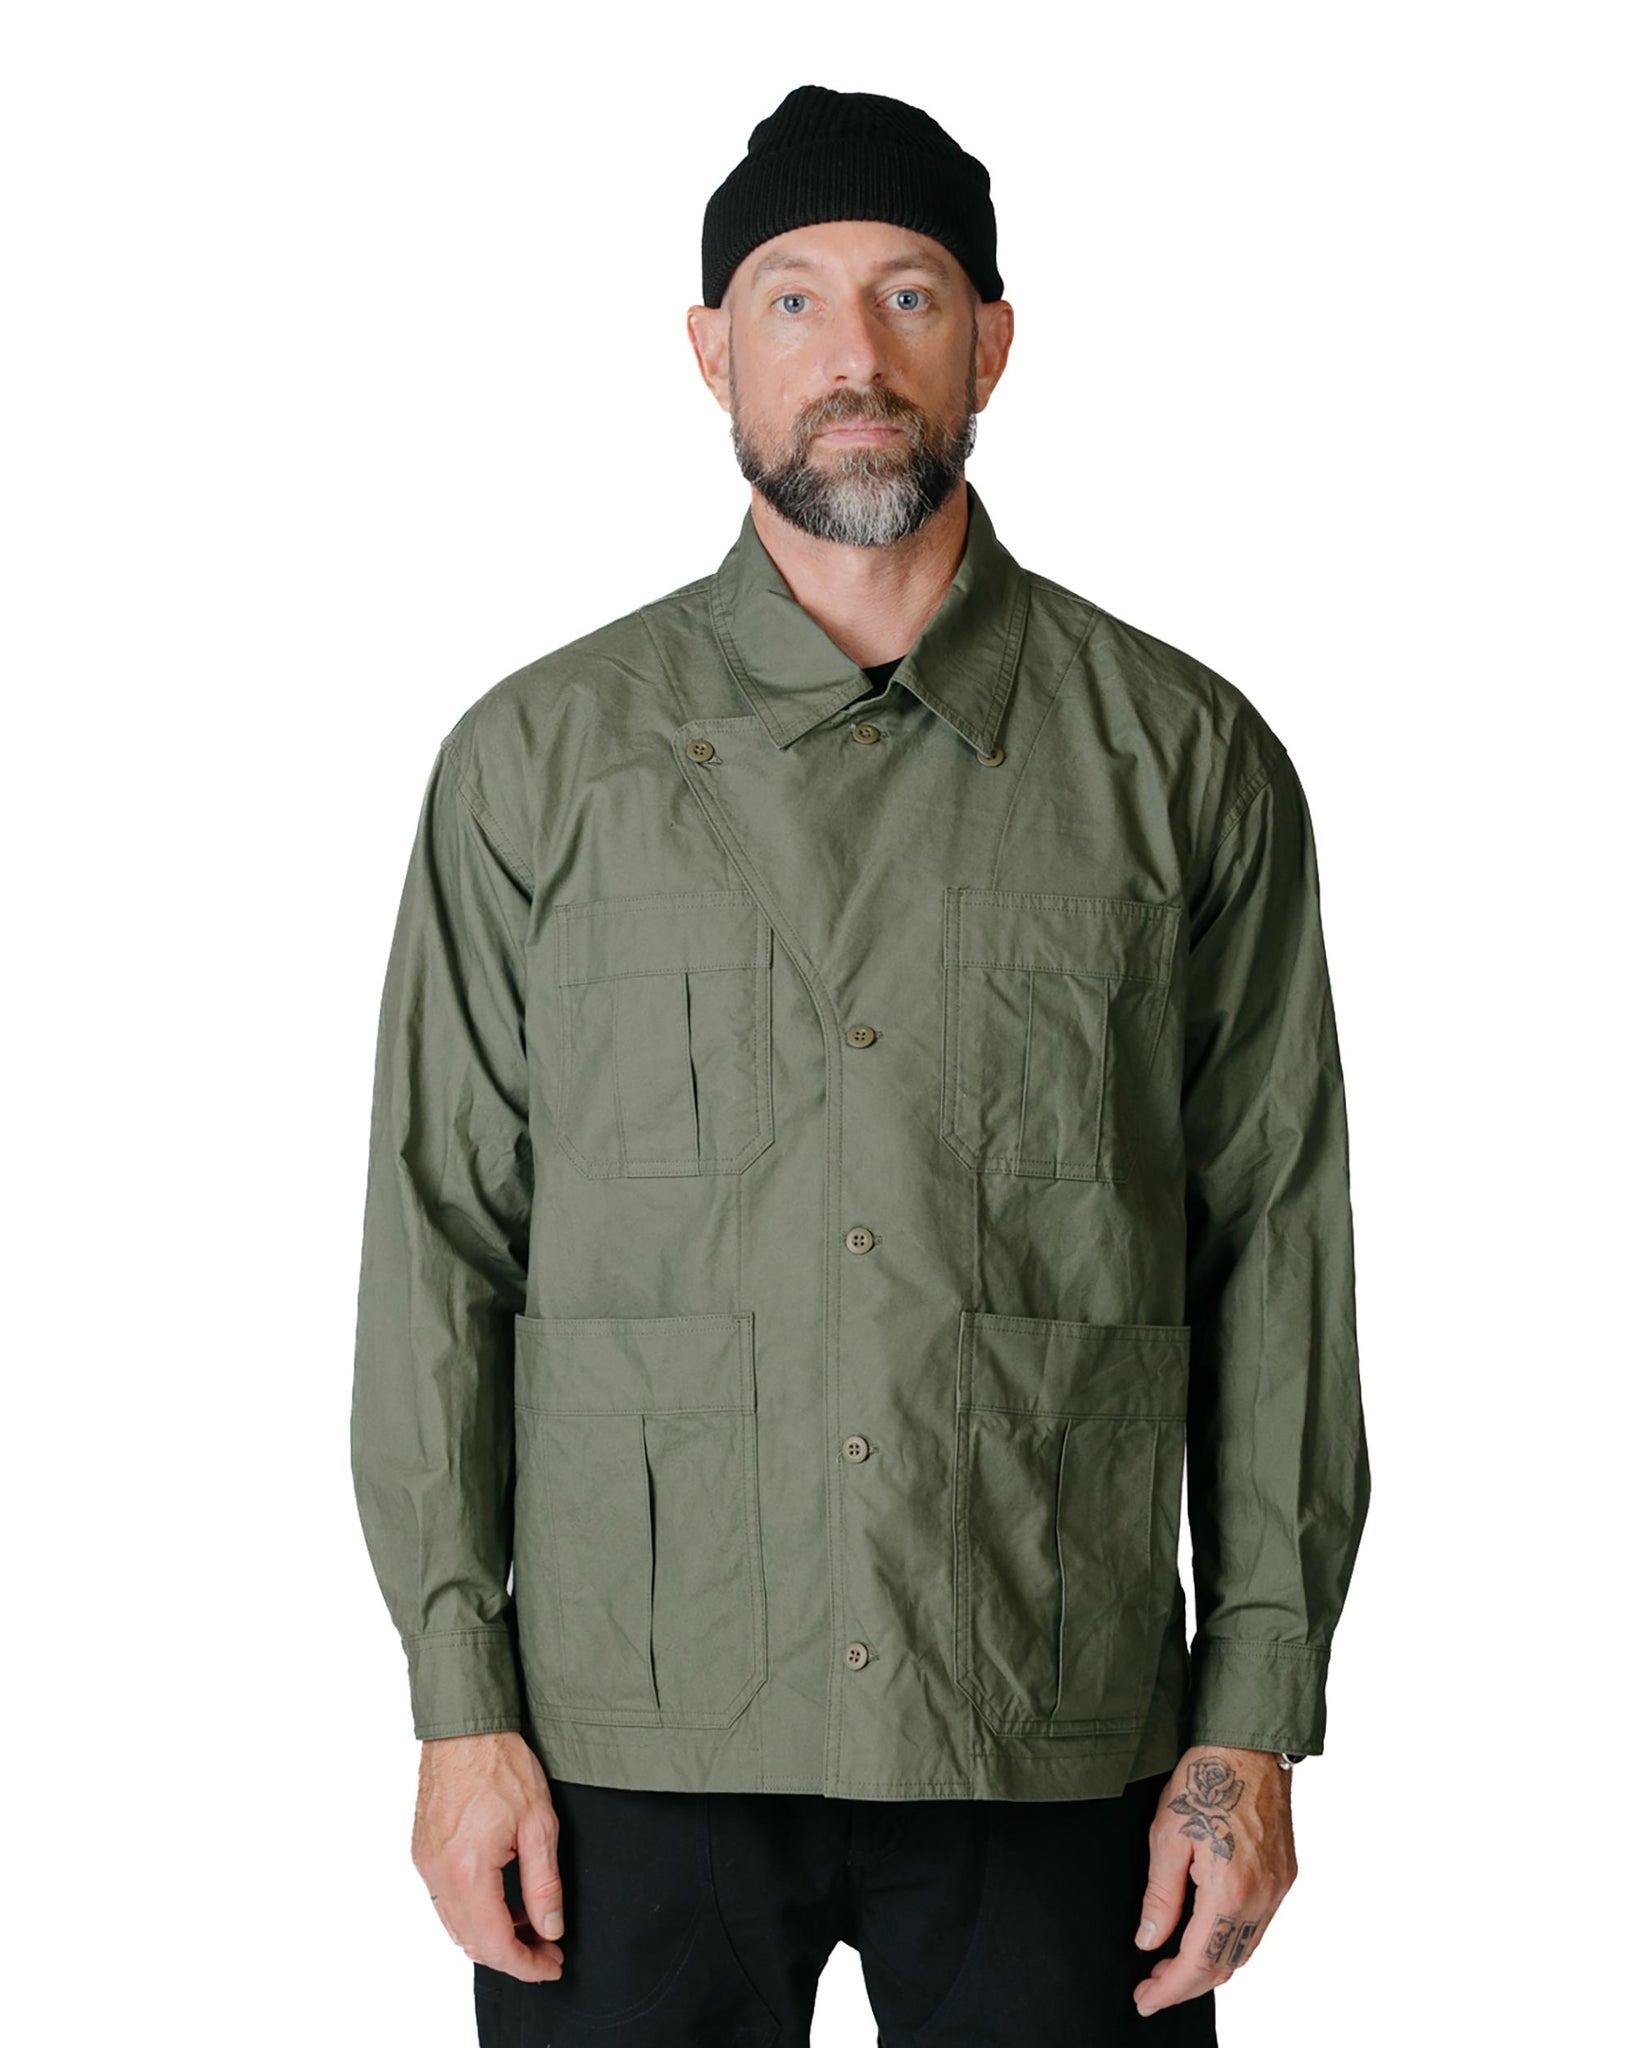 ts(s) Military Shirt Jacket High Density Cotton Canvas Cloth OD Model Front